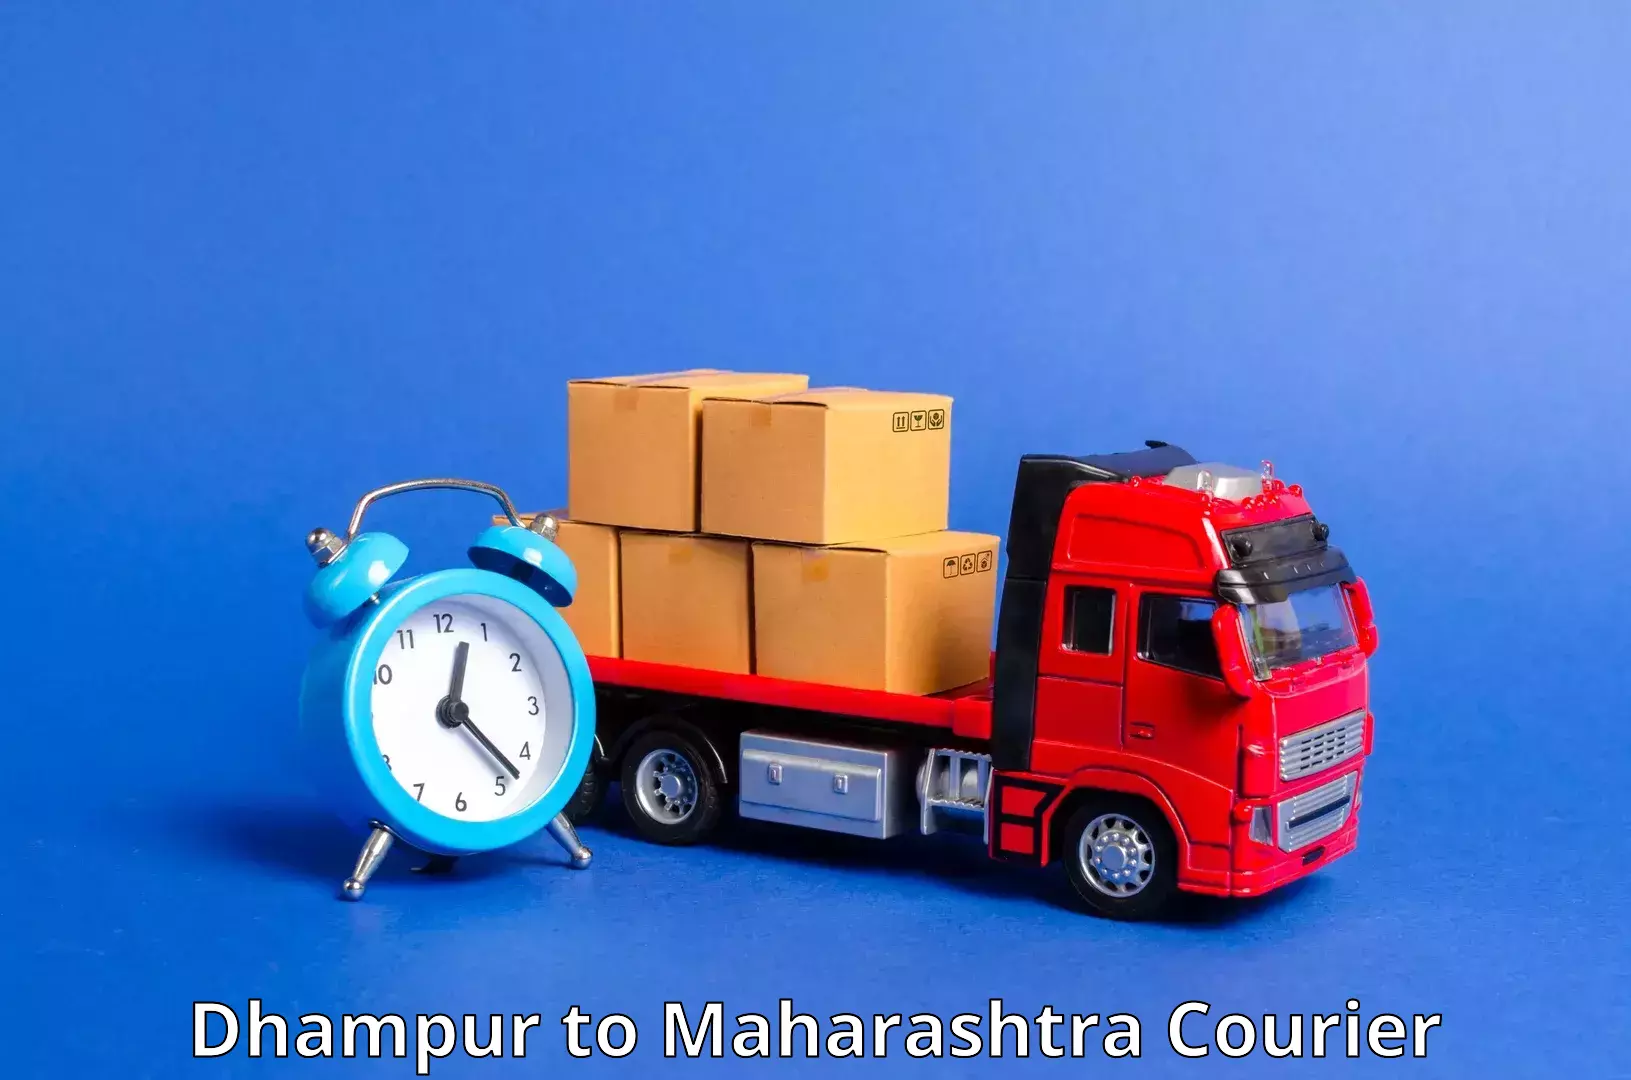 Nationwide shipping capabilities Dhampur to Chandrapur